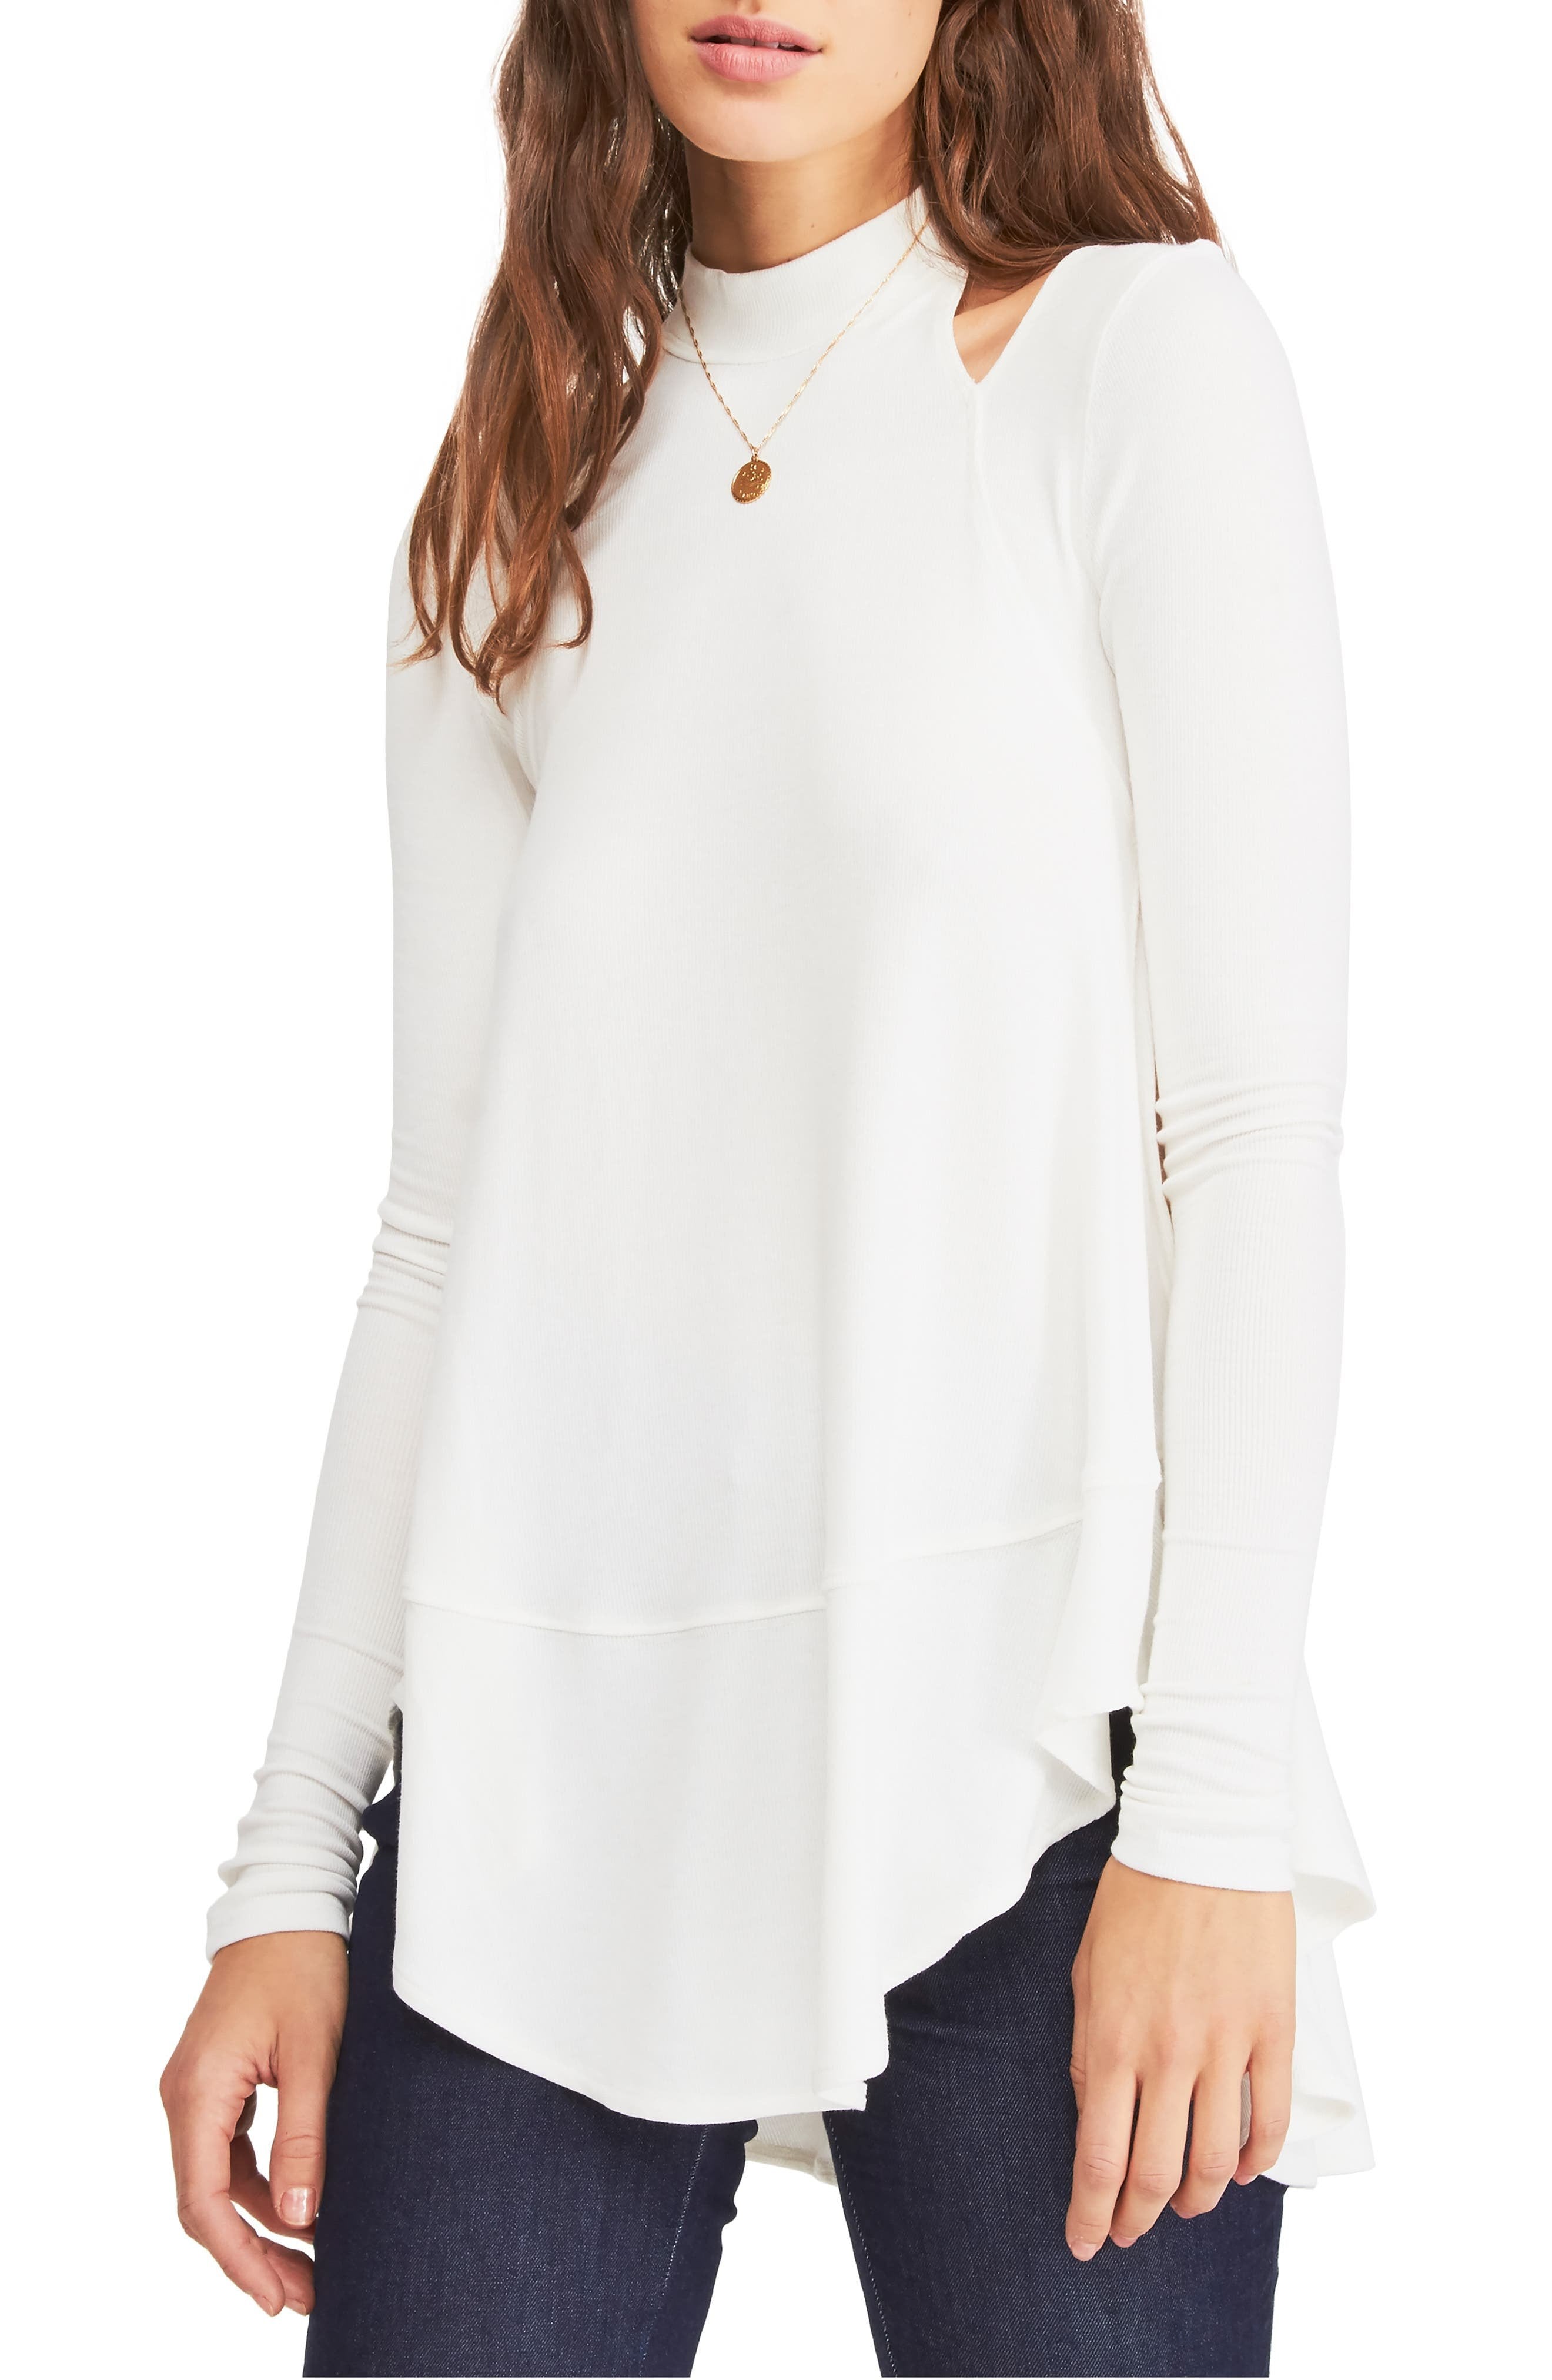 Free People Downtown Girl Tunic Mock Neck Ribbed Tunic Top | White - Small